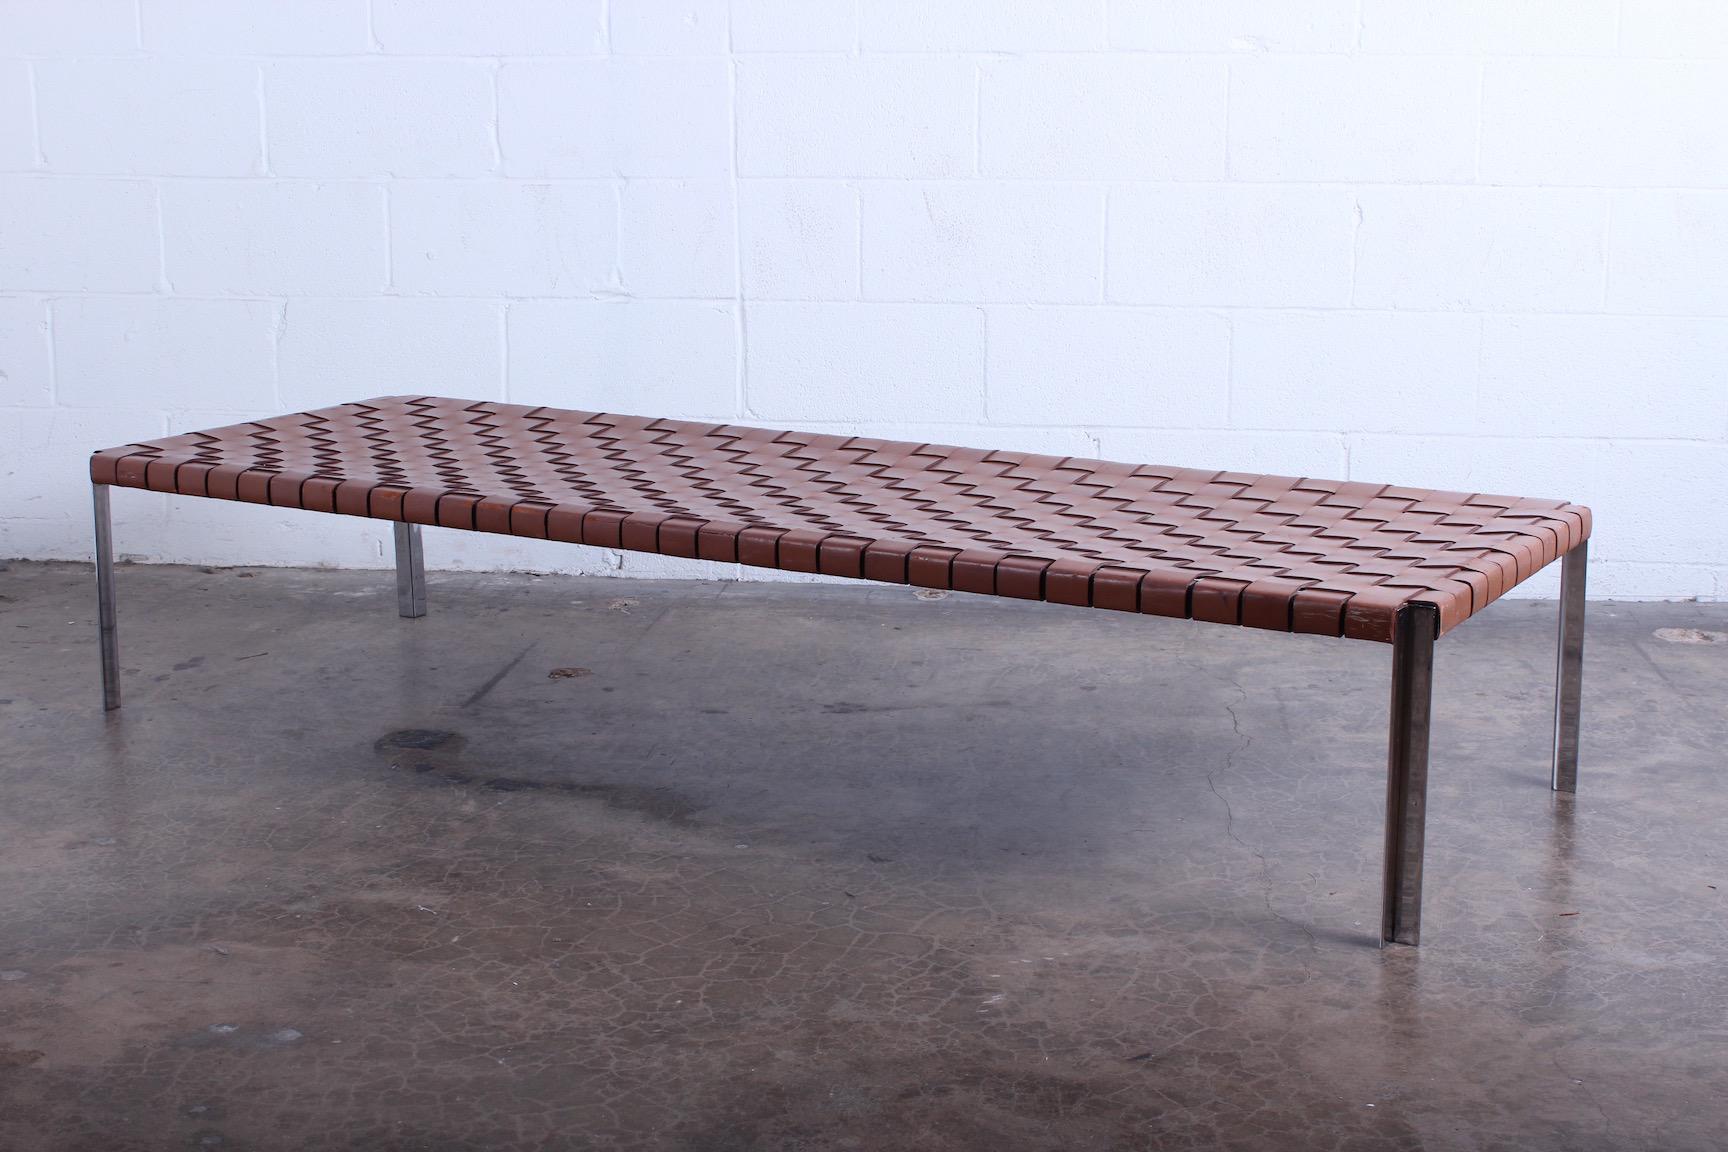 Woven Leather Bench by Estelle and Erwine Laverne (Mitte des 20. Jahrhunderts)